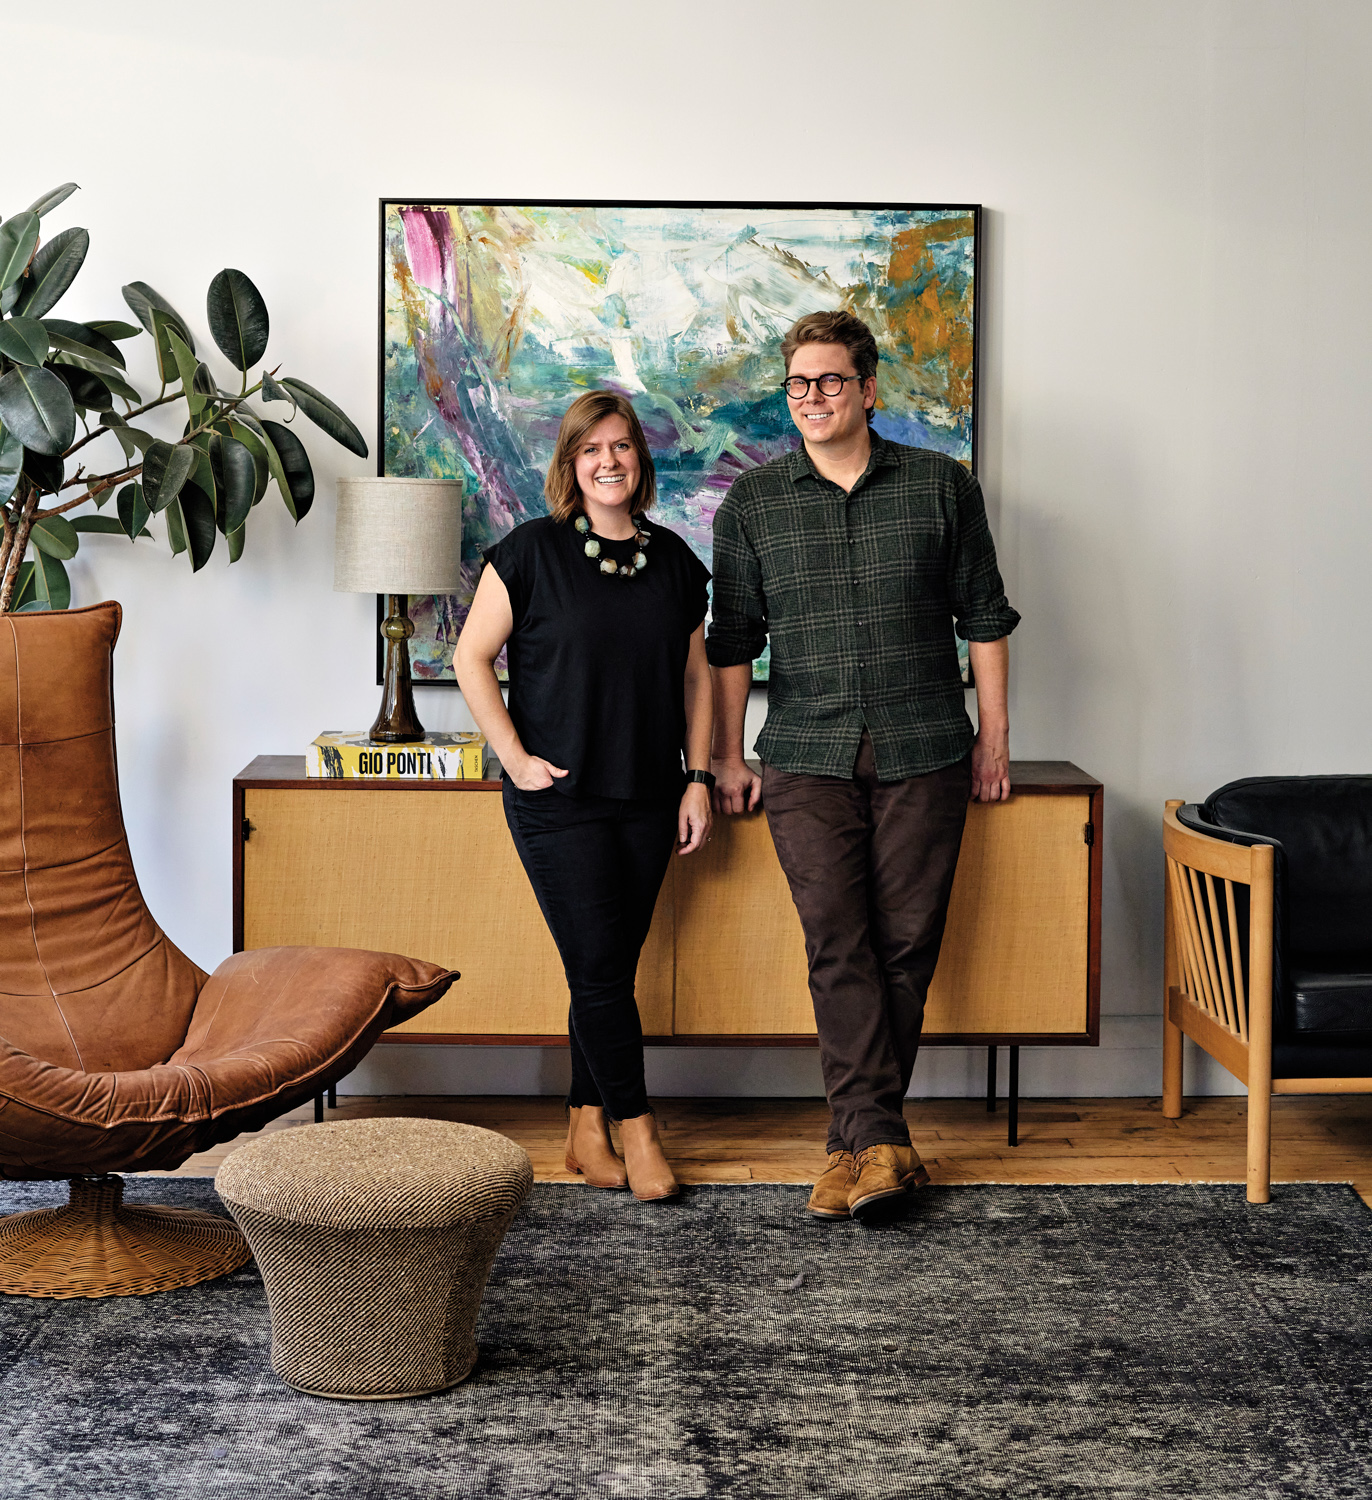 Megan Prime and Joe McGuire standing in front of a console, artwork, and leather lounge chair